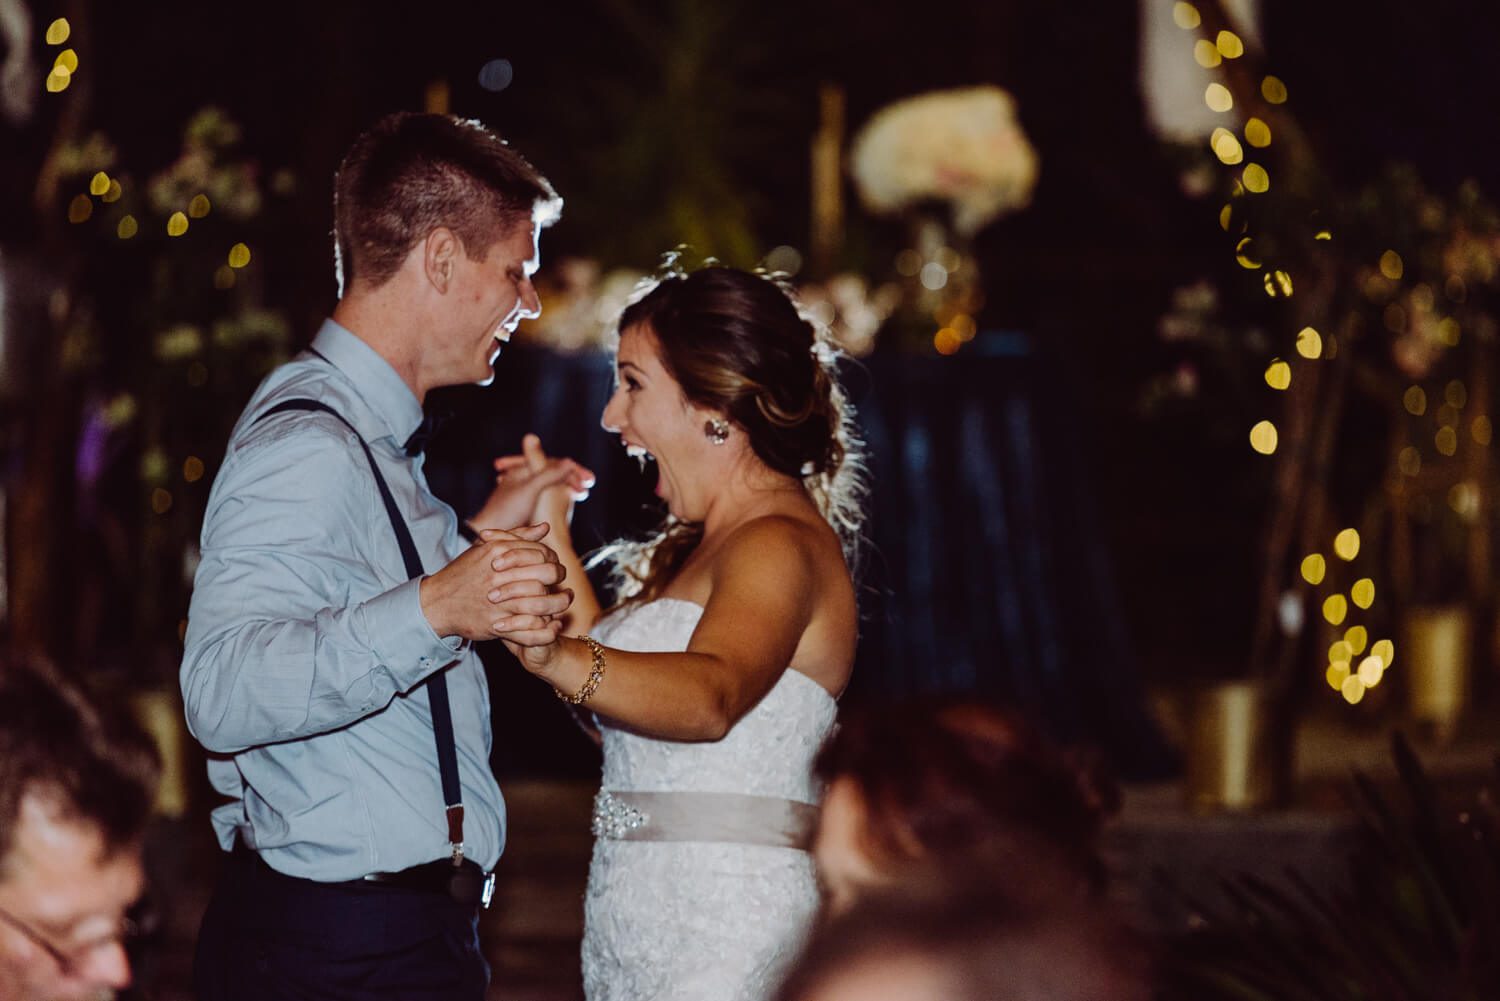 Wendy & Michael's Key West wedding captured by Freas Photography features a heartwarming first dance.